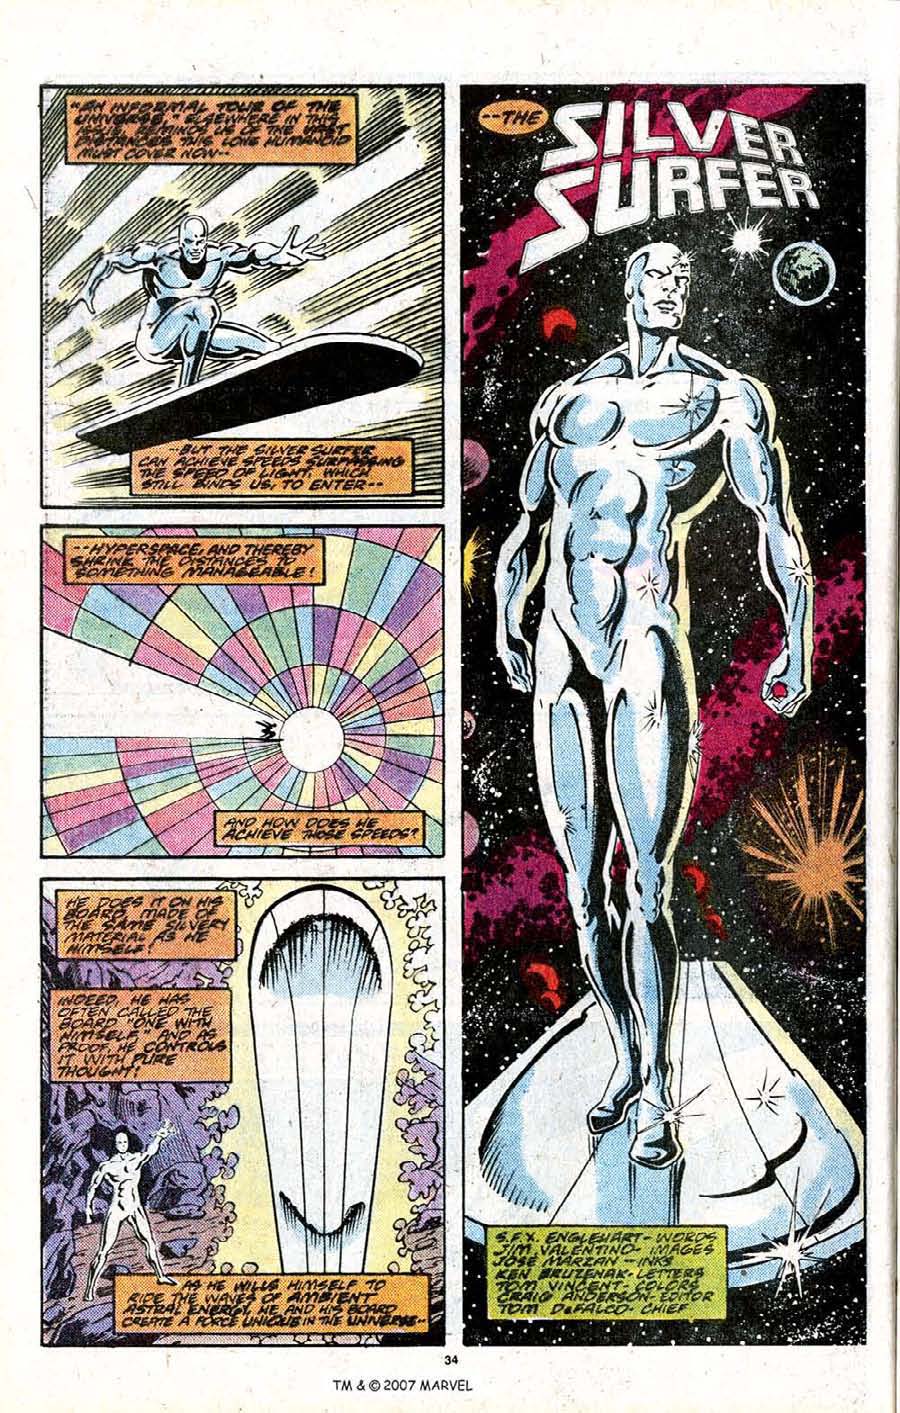 Above, Englehart explains the Surfer exceeds the speed of light and can then enter hyperspace and THIS definition is consistent with the Silver Surfer's ability to exceed light speed and utilize or NOT utilize hyperspace if he chooses to as substantiated below: